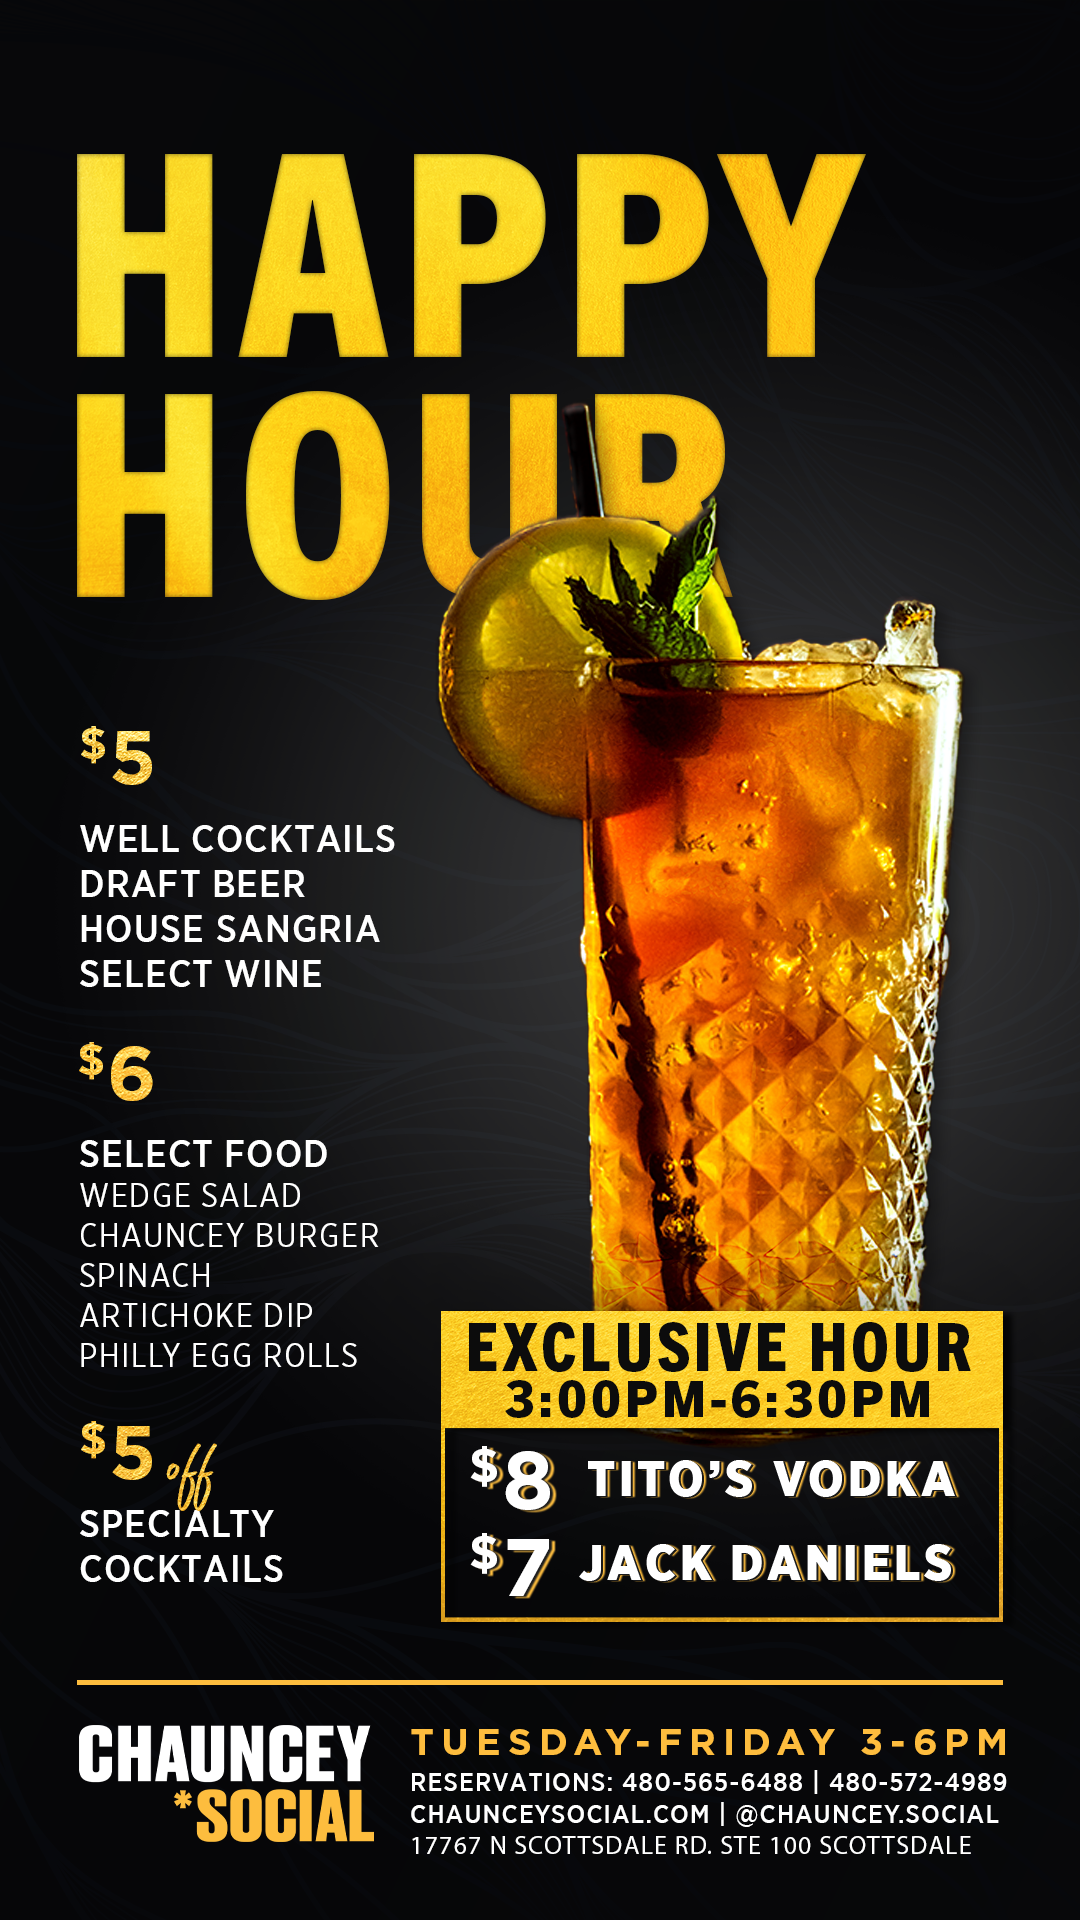 HAPPY HOUR 3:00pm - 6:30pm| $5 Well Cocktails, Draft Beer, House Sangria, Select Wine | $6 Select Food